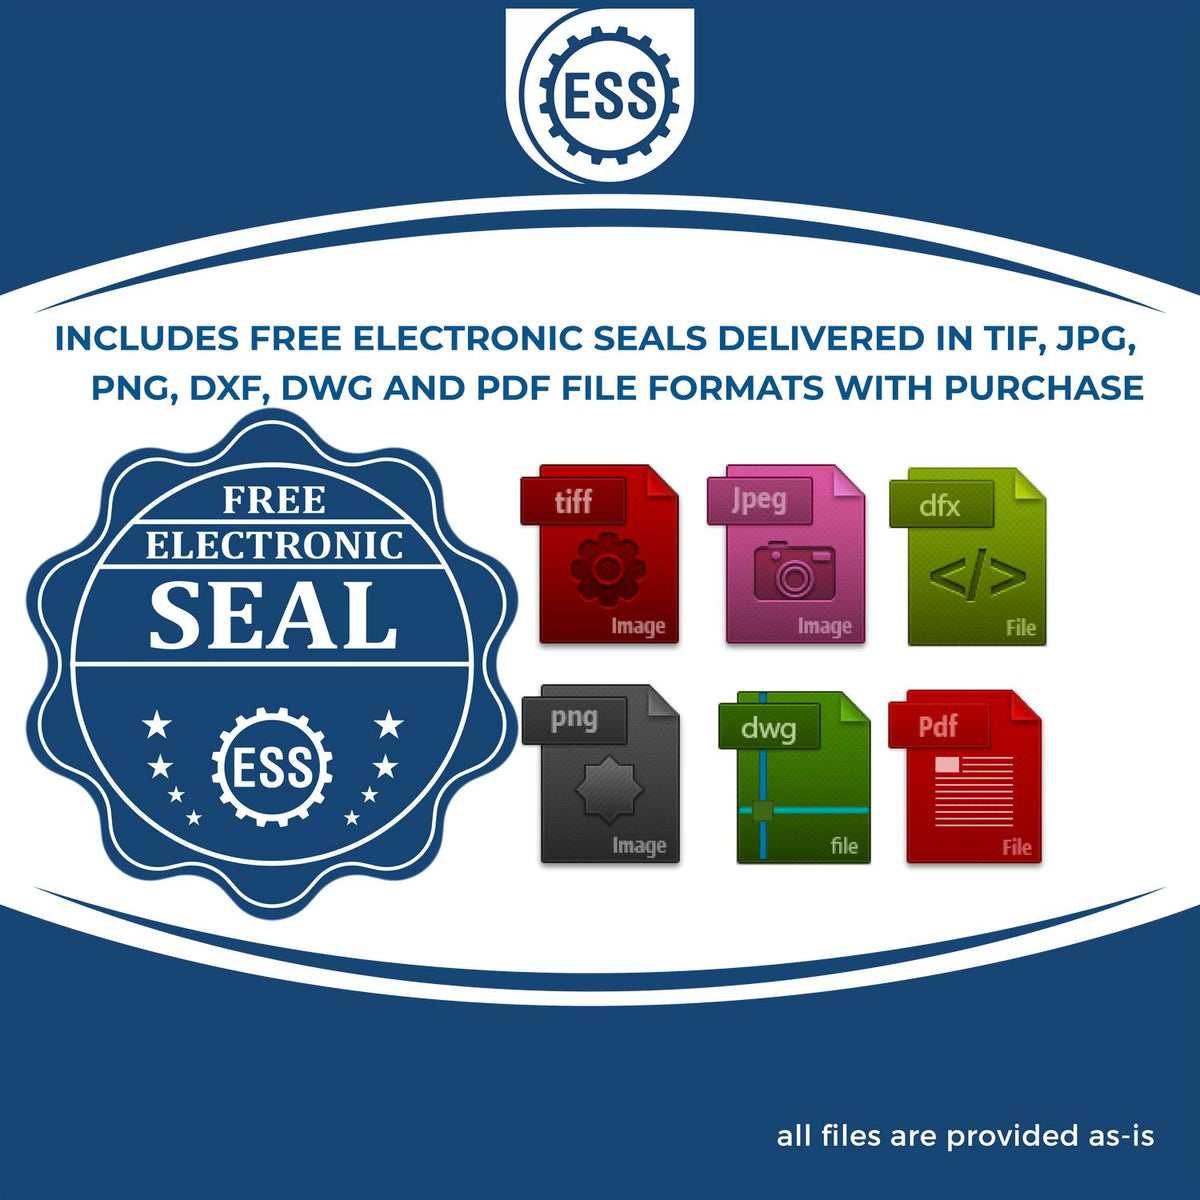 An infographic for the free electronic seal for the Self-Inking State Seal Wisconsin Notary Stamp illustrating the different file type icons such as DXF, DWG, TIF, JPG and PNG.